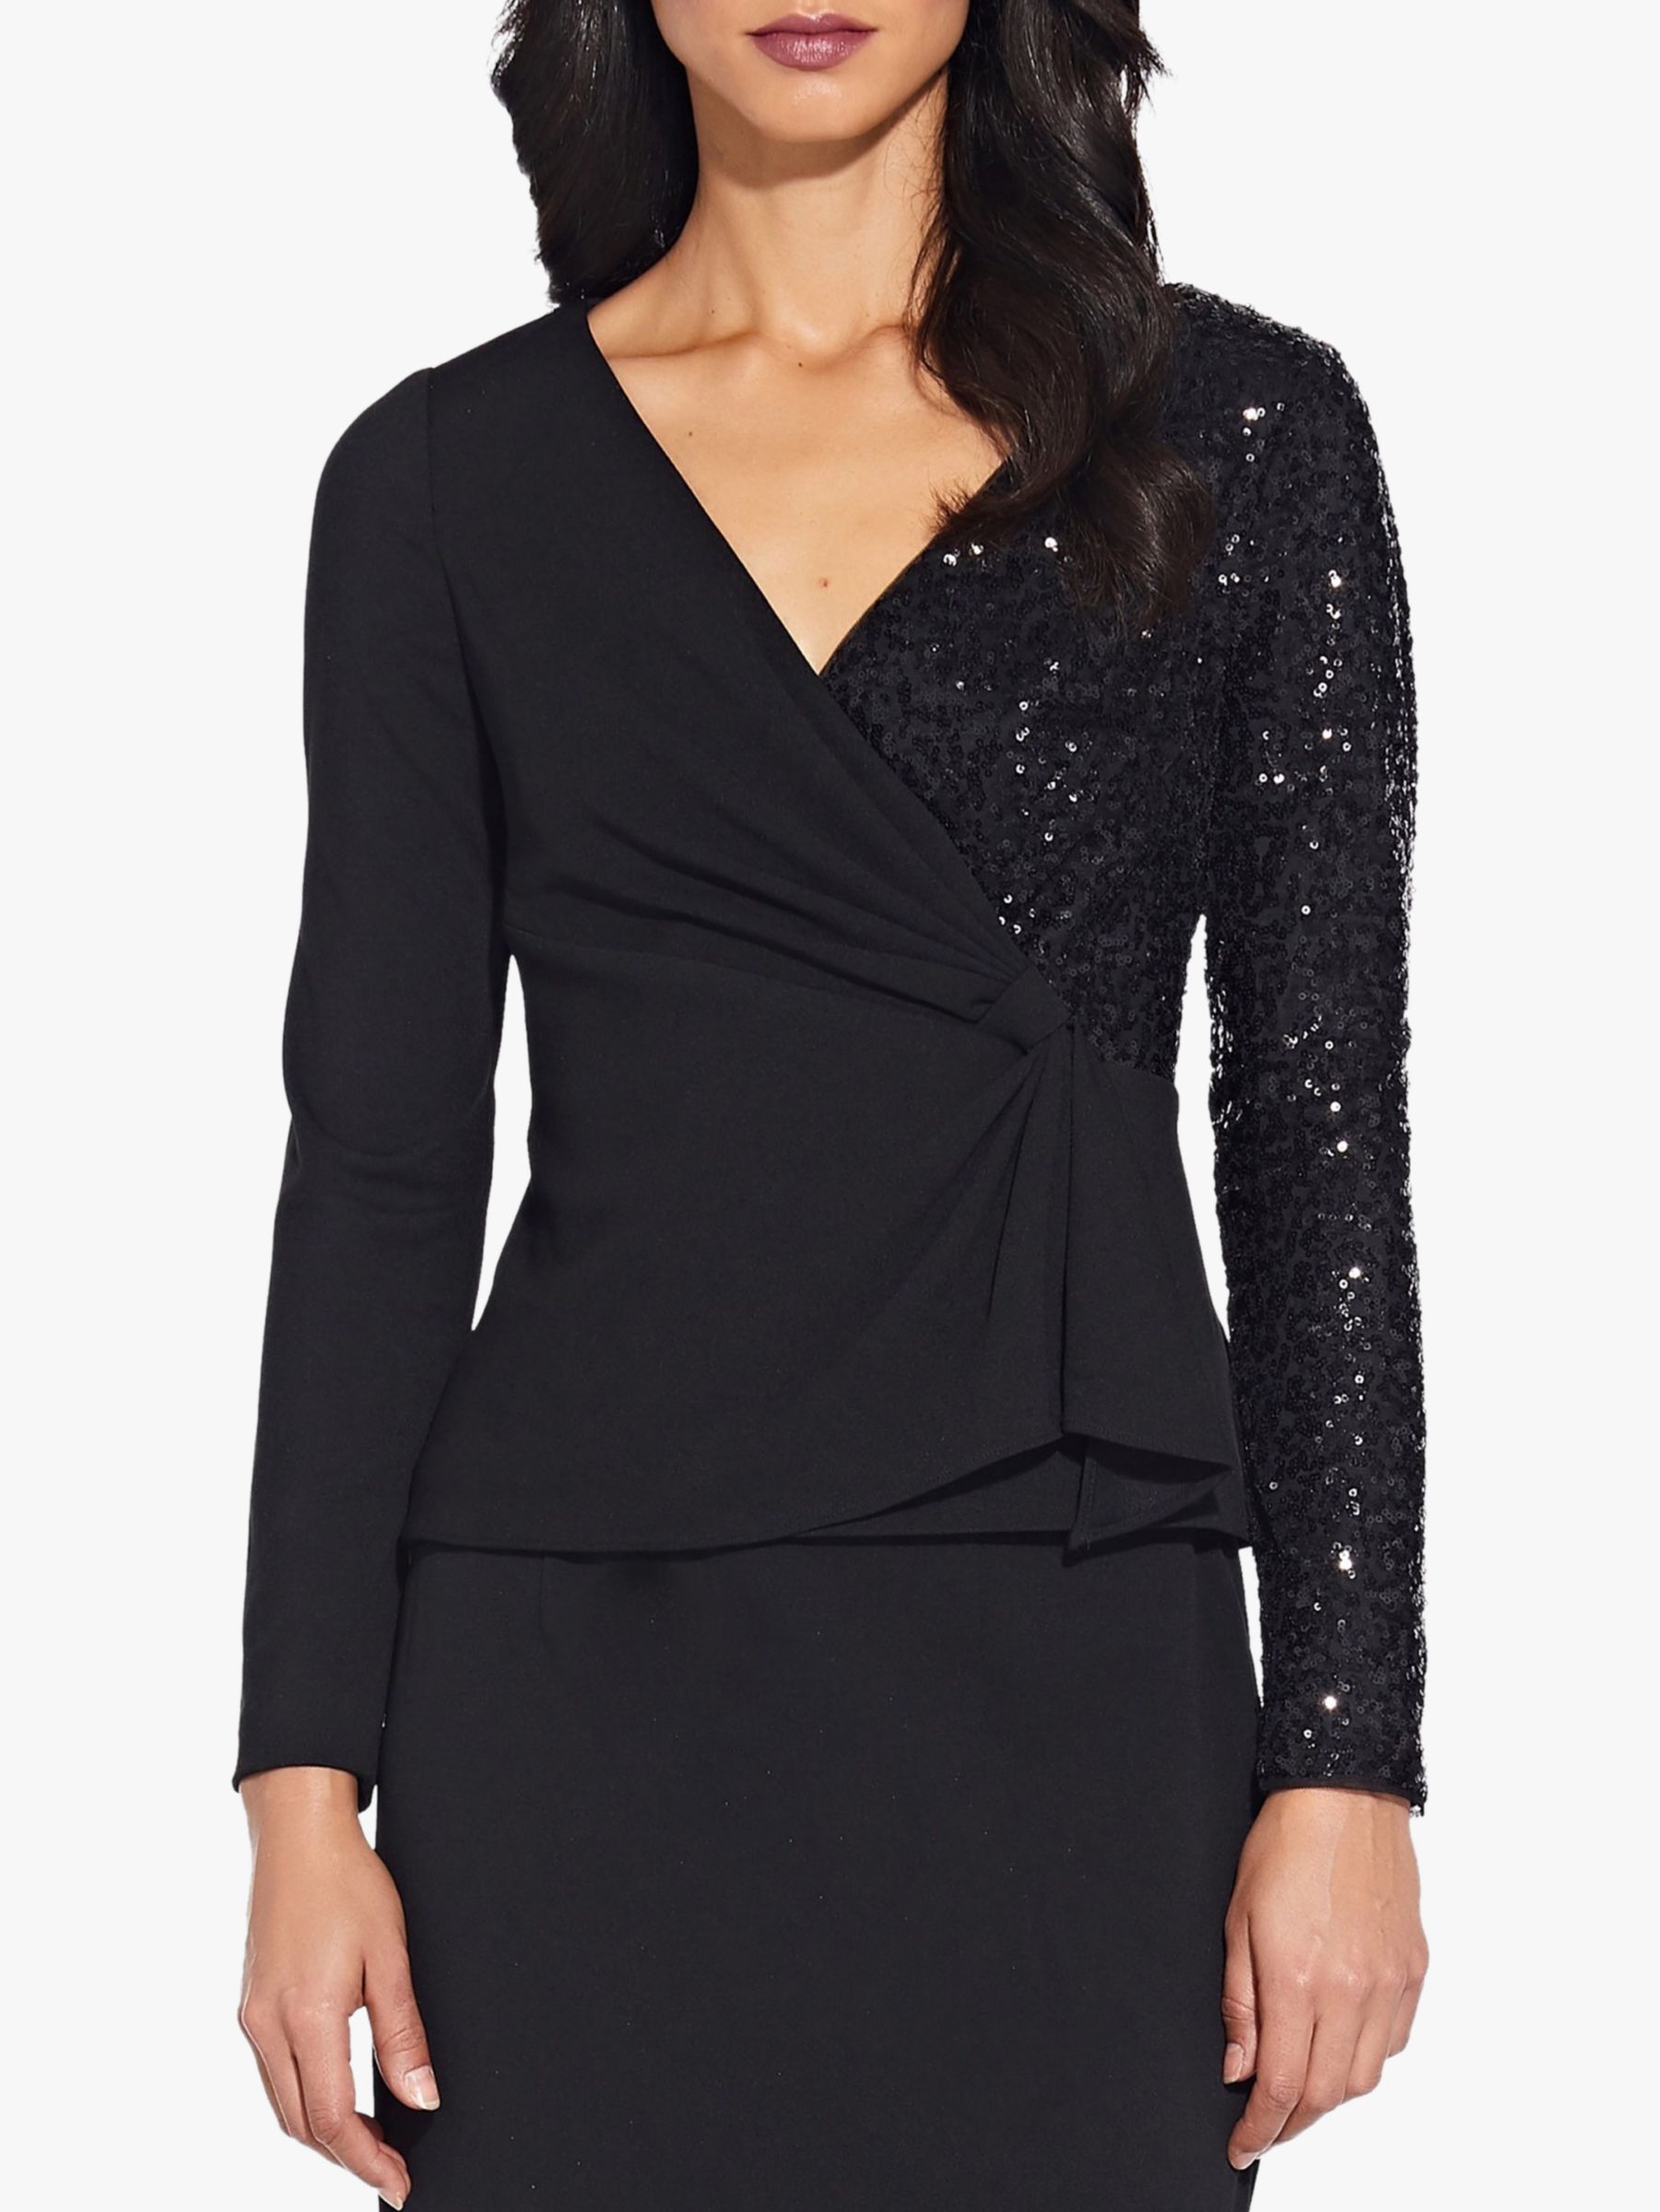 Adrianna Papell Sequin Crepe Top, Black